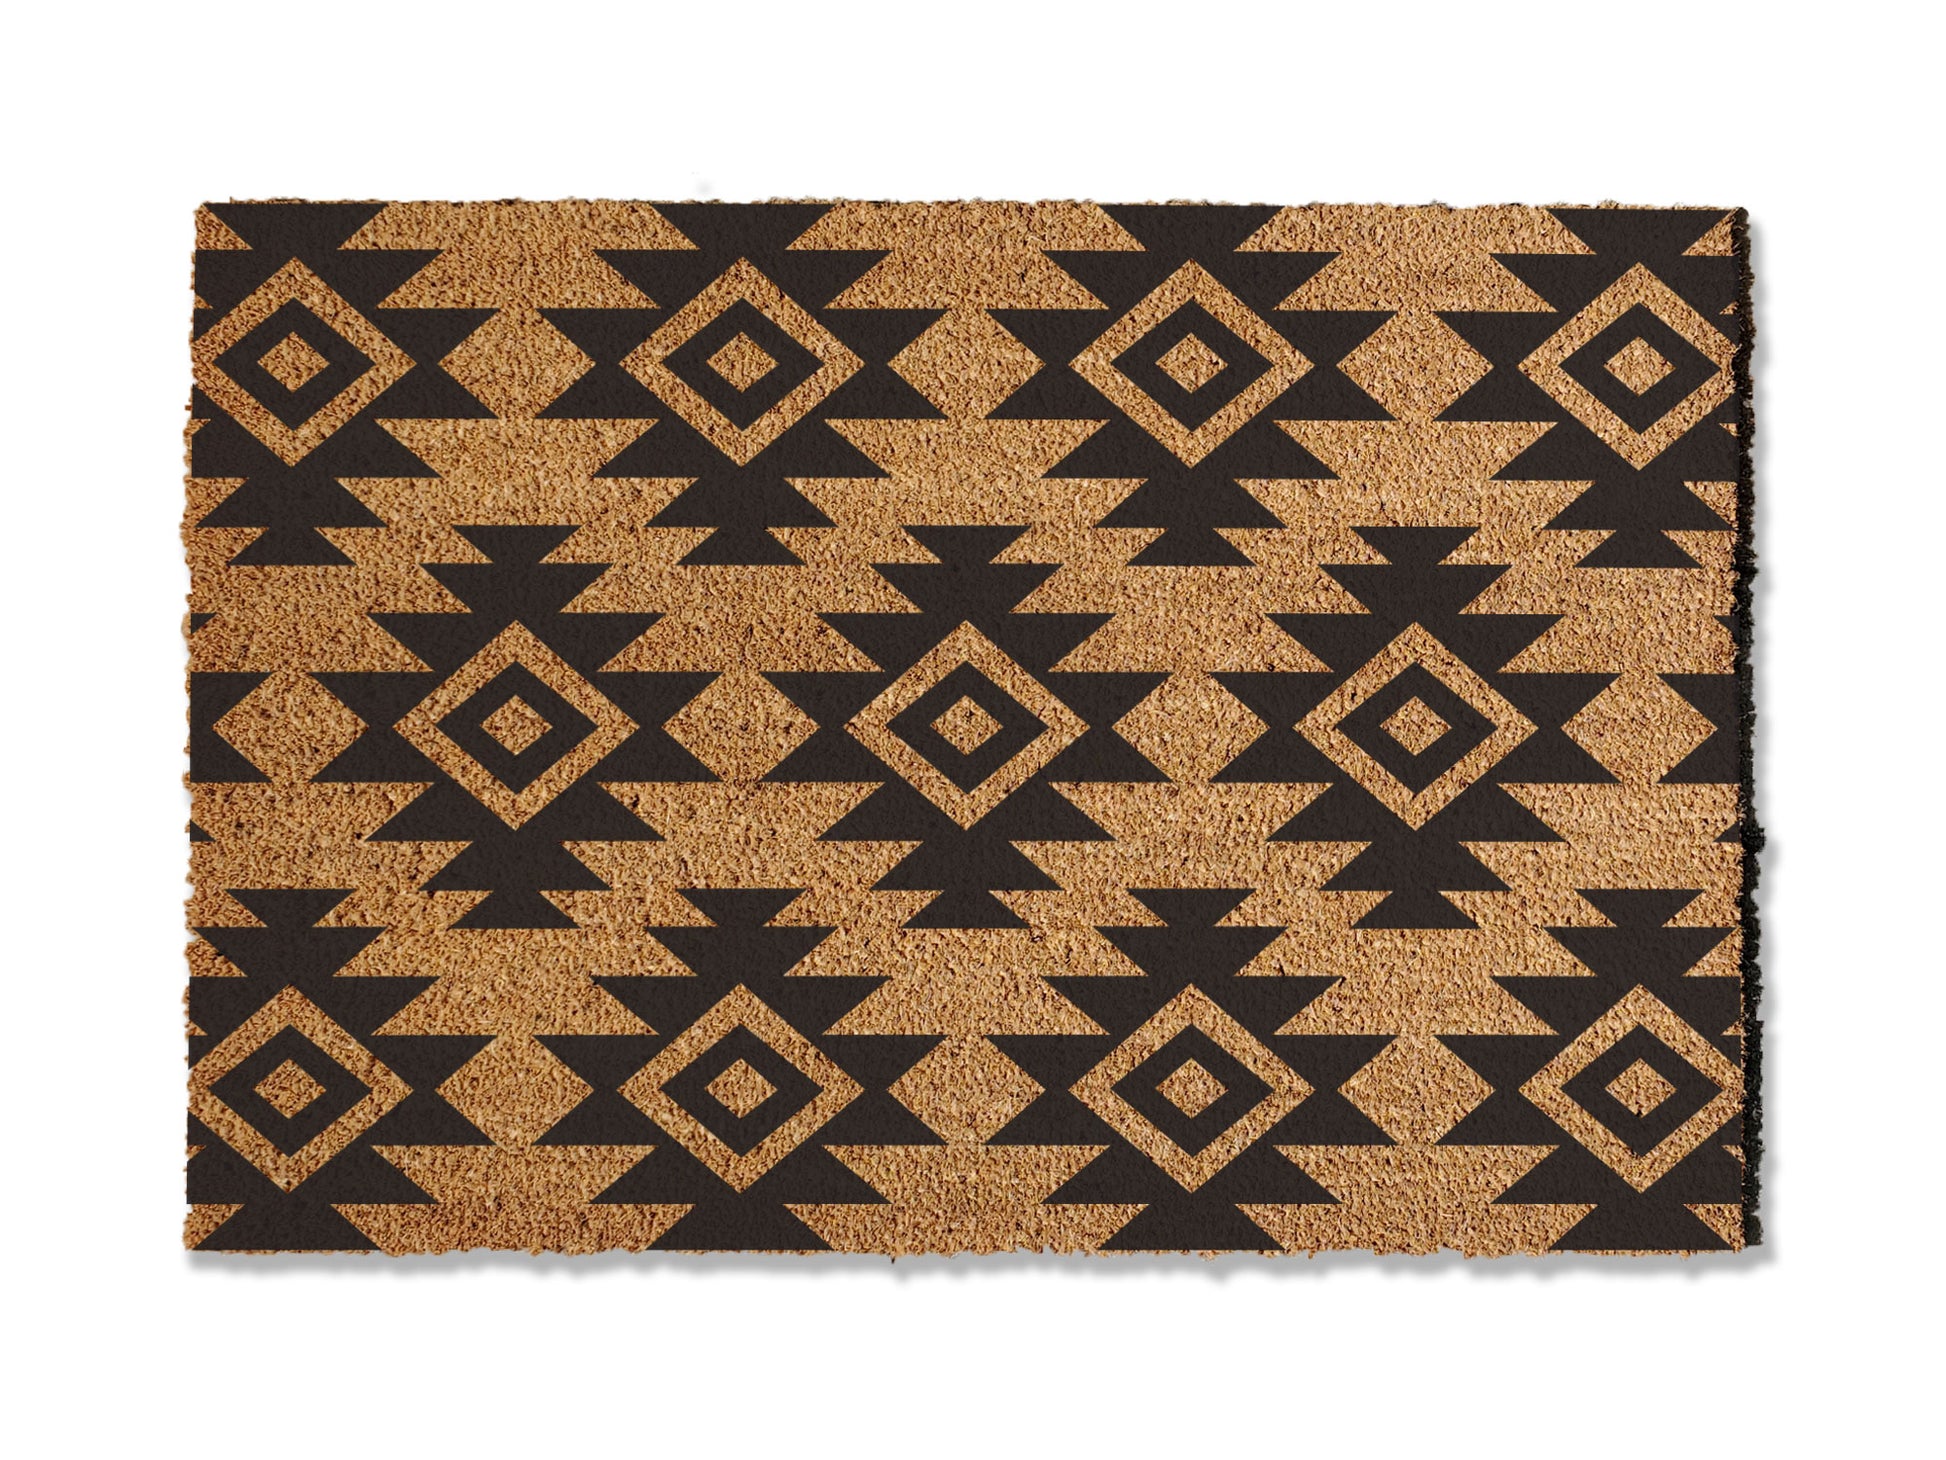 A coir doormat that is 24 inches by 36 inches and has a geometric aztec print painted on it.